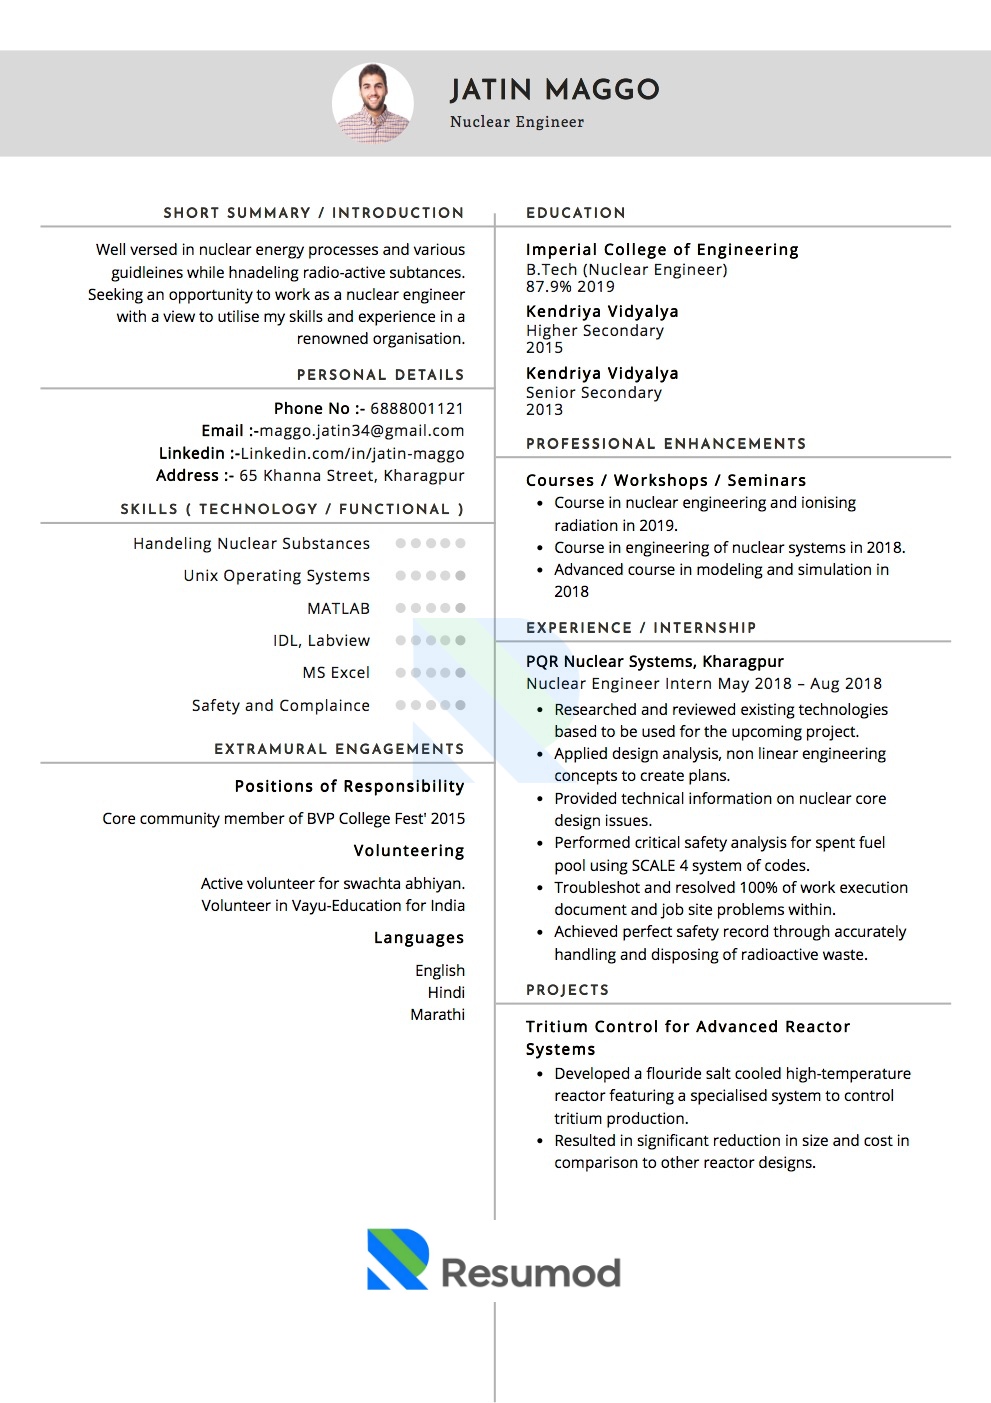 Sample Resume of Nuclear Engineer | Free Resume Templates & Samples on Resumod.co